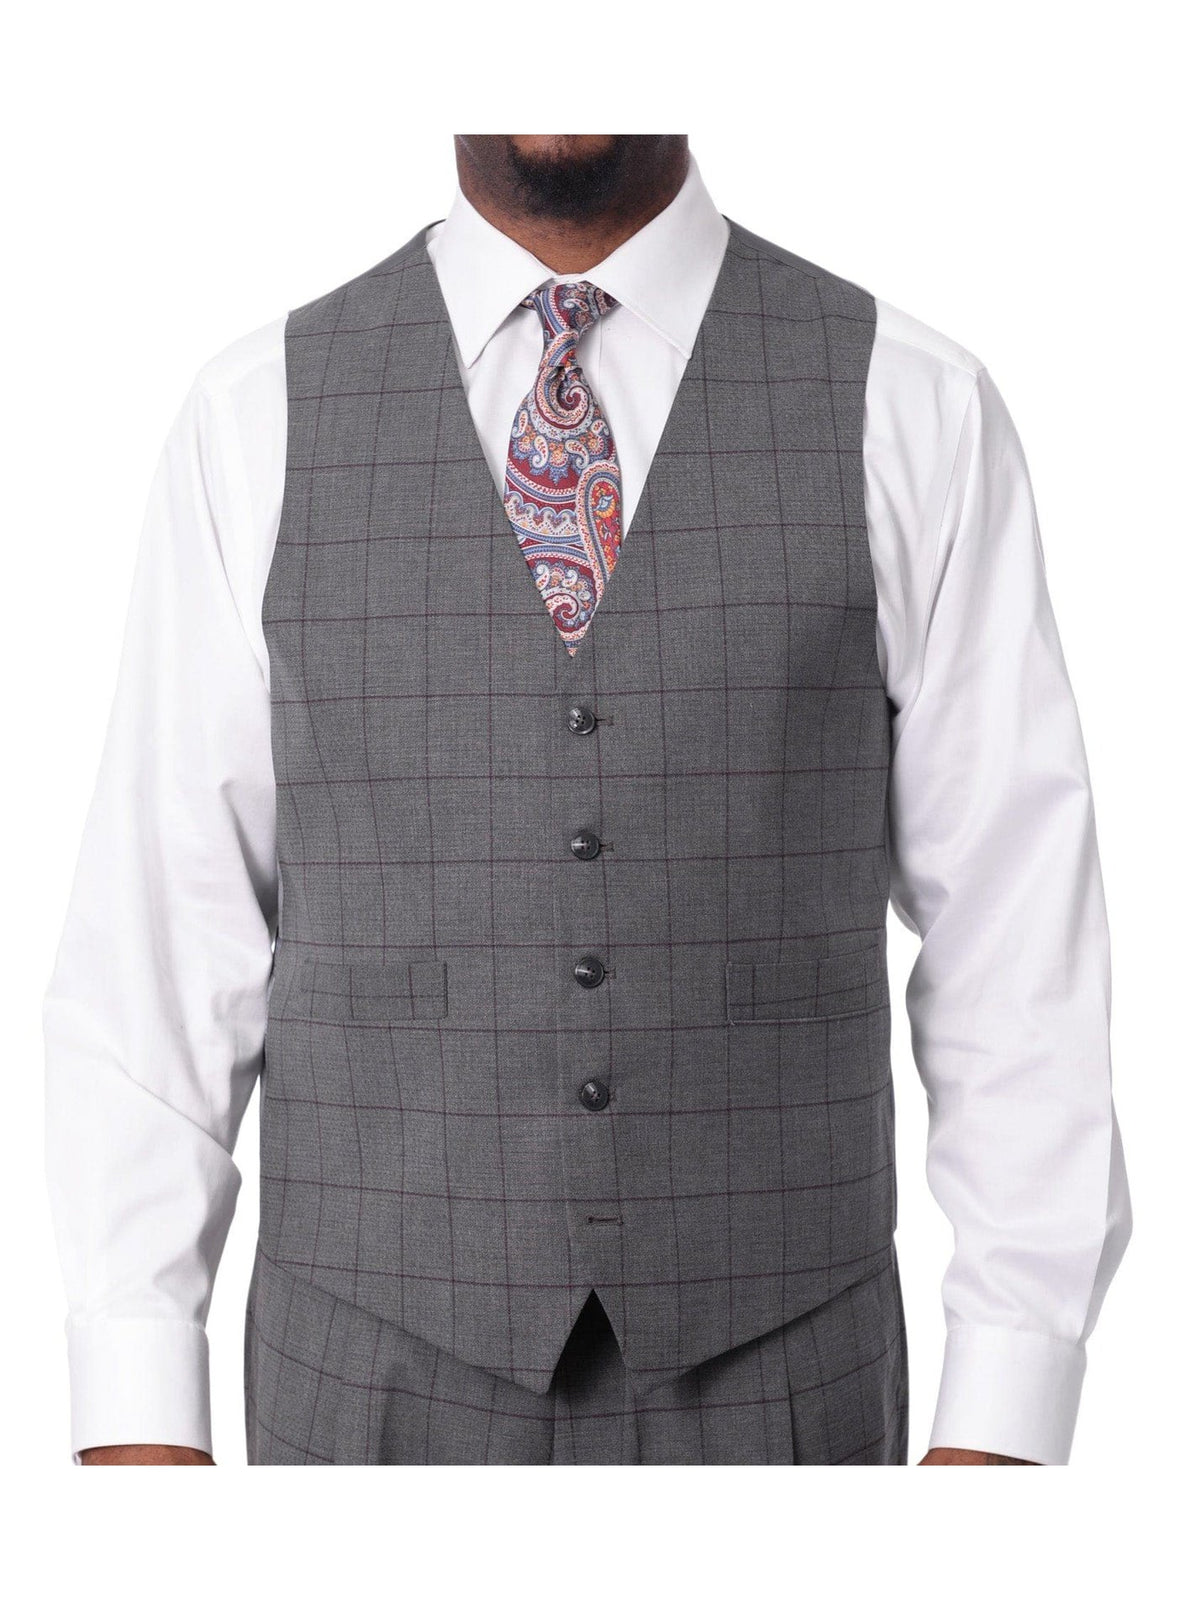 Extrema Extrema Mens Gray Check Wool Blend 3 Piece Vested Regular Fit Suit